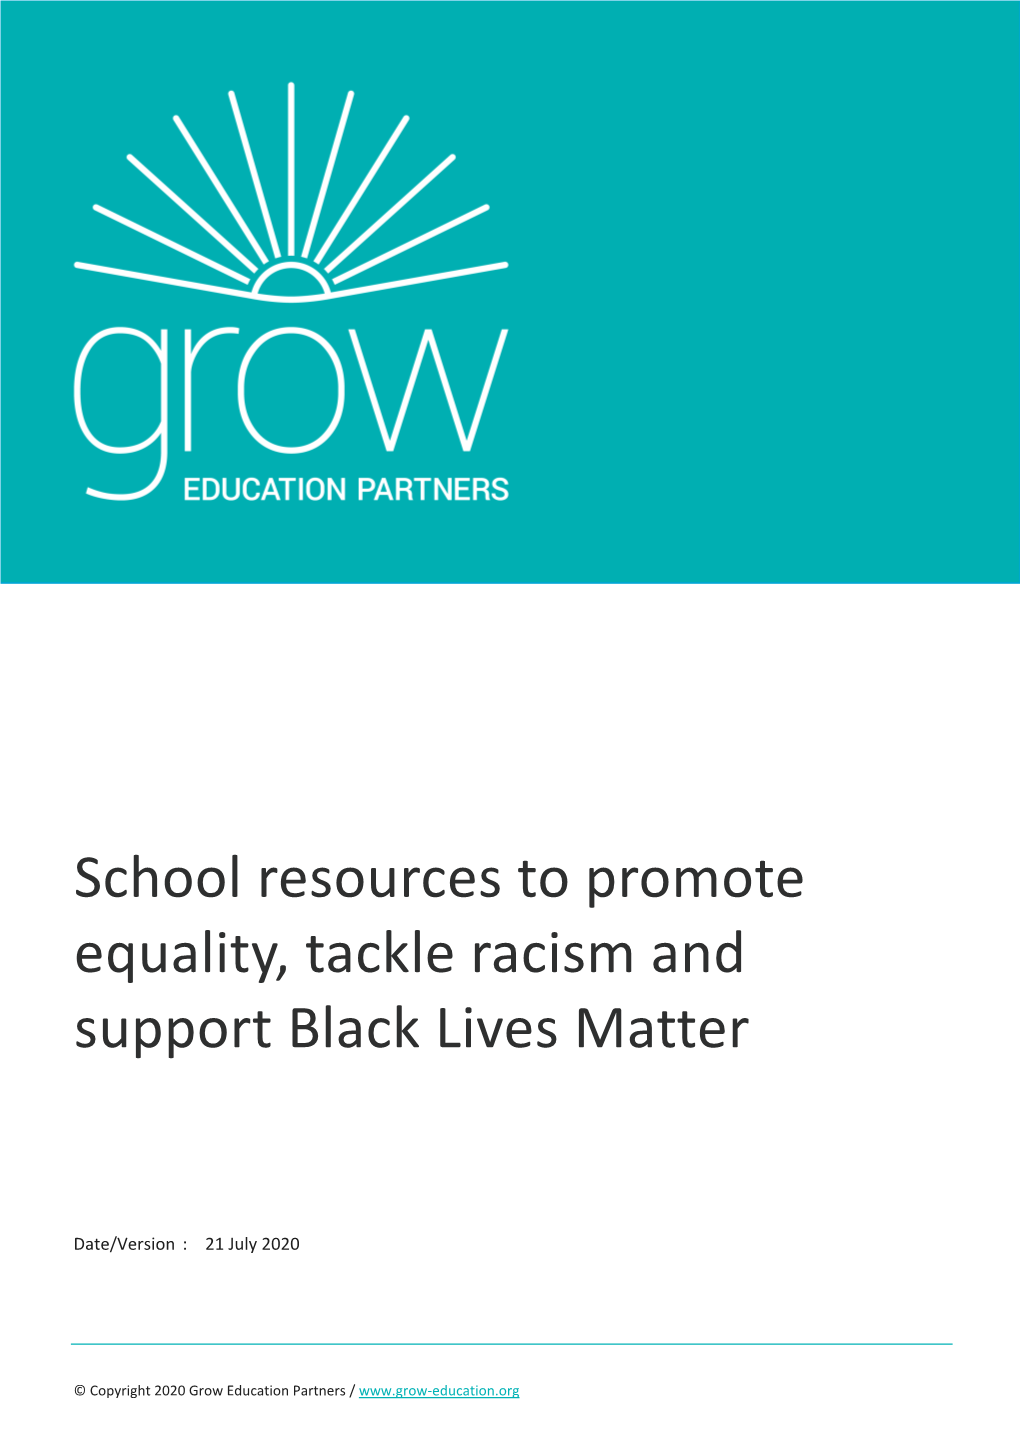 School Resources to Promote Equality, Tackle Racism and Support Black